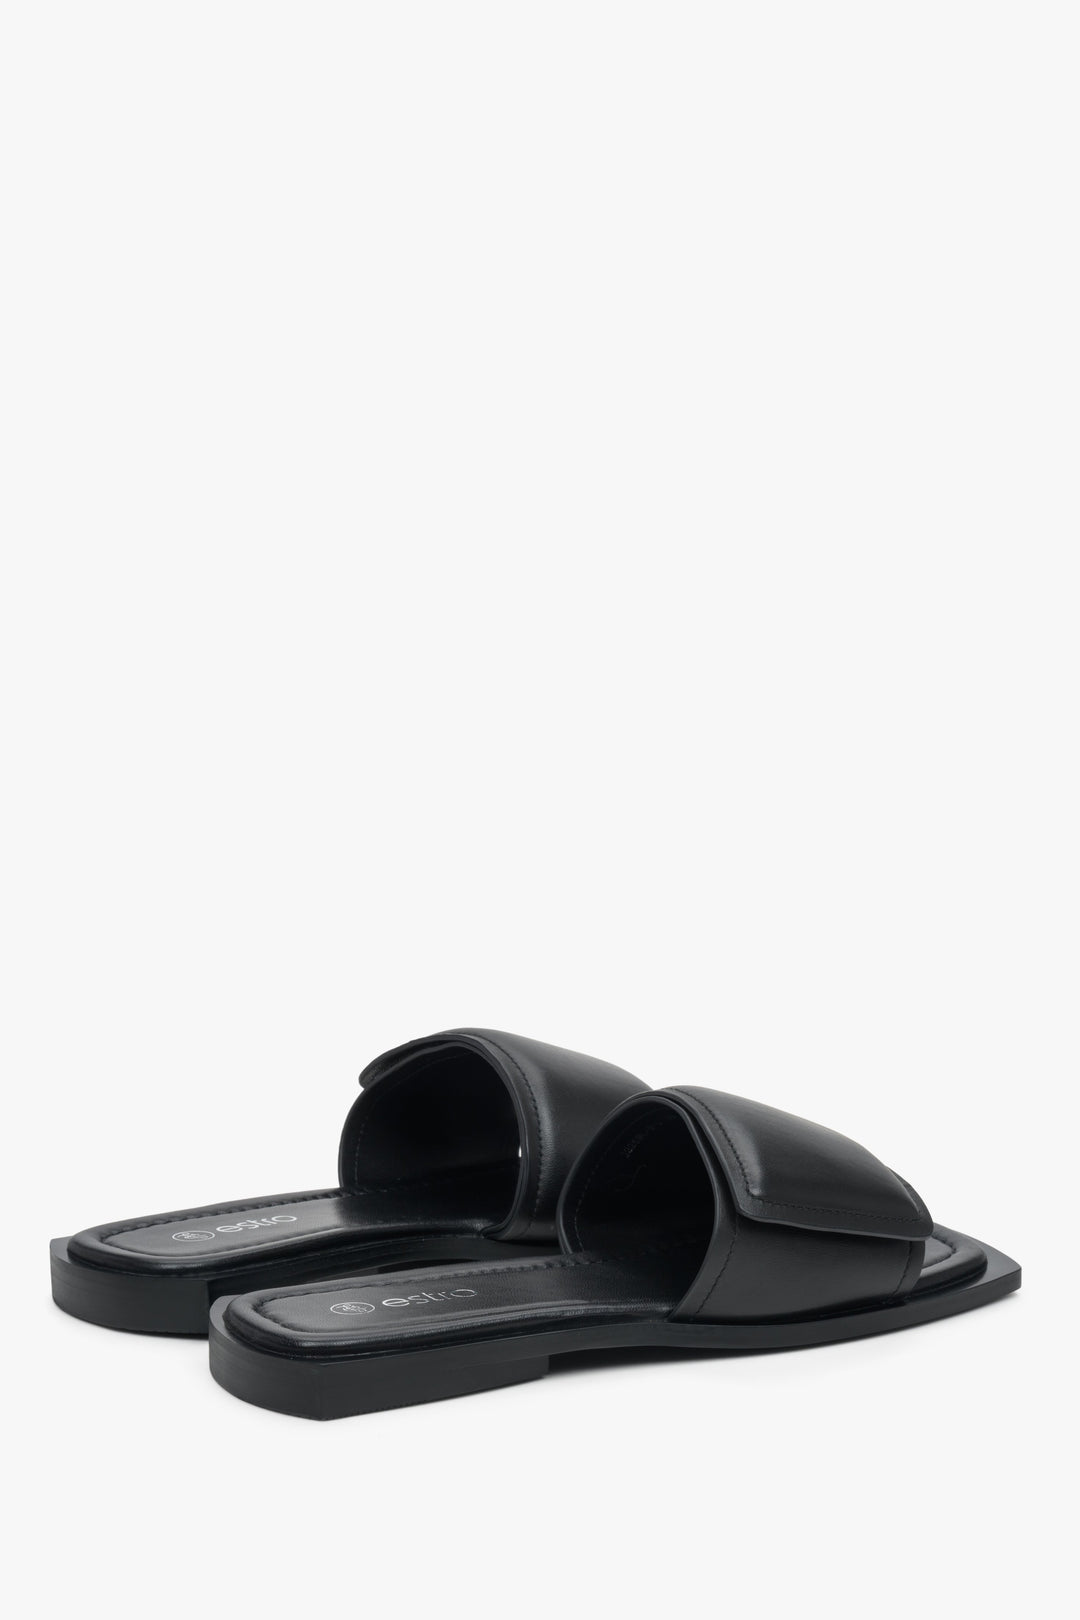 Estro women's slide sandals in black with hook and loop fastening - close-up on shoe sideline.